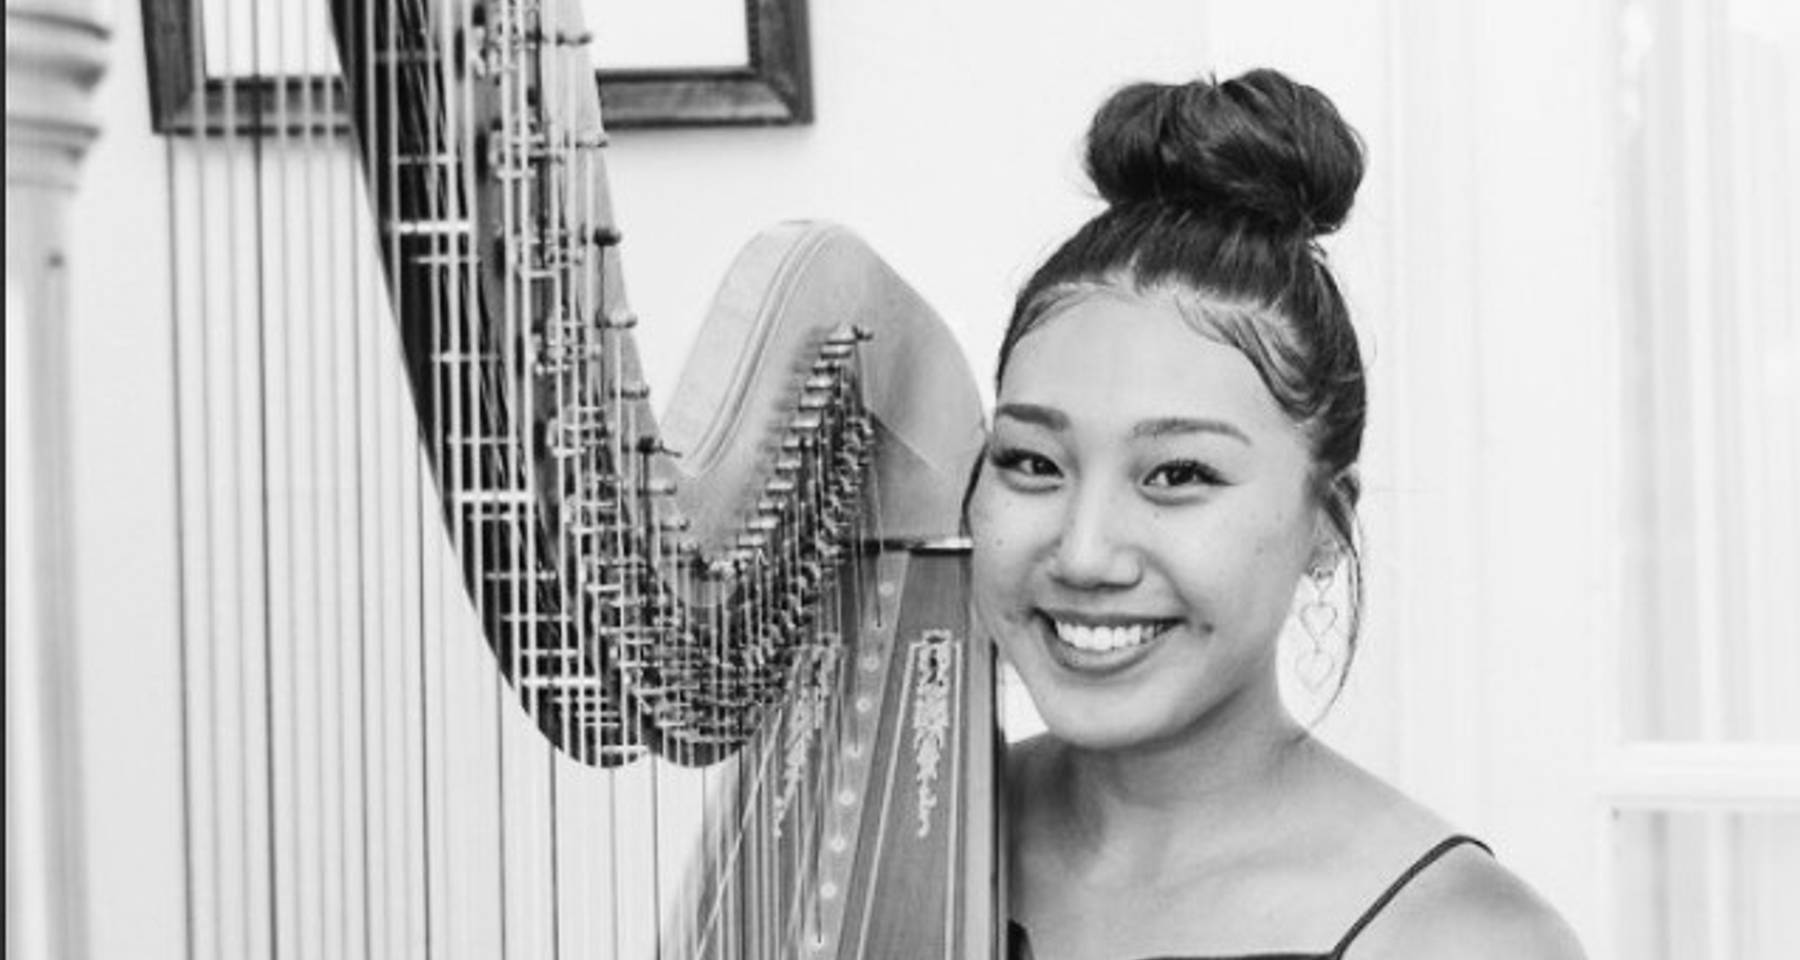 ROUNDCOLLAB Presents: Harp for the Holidays by Amy Ahn